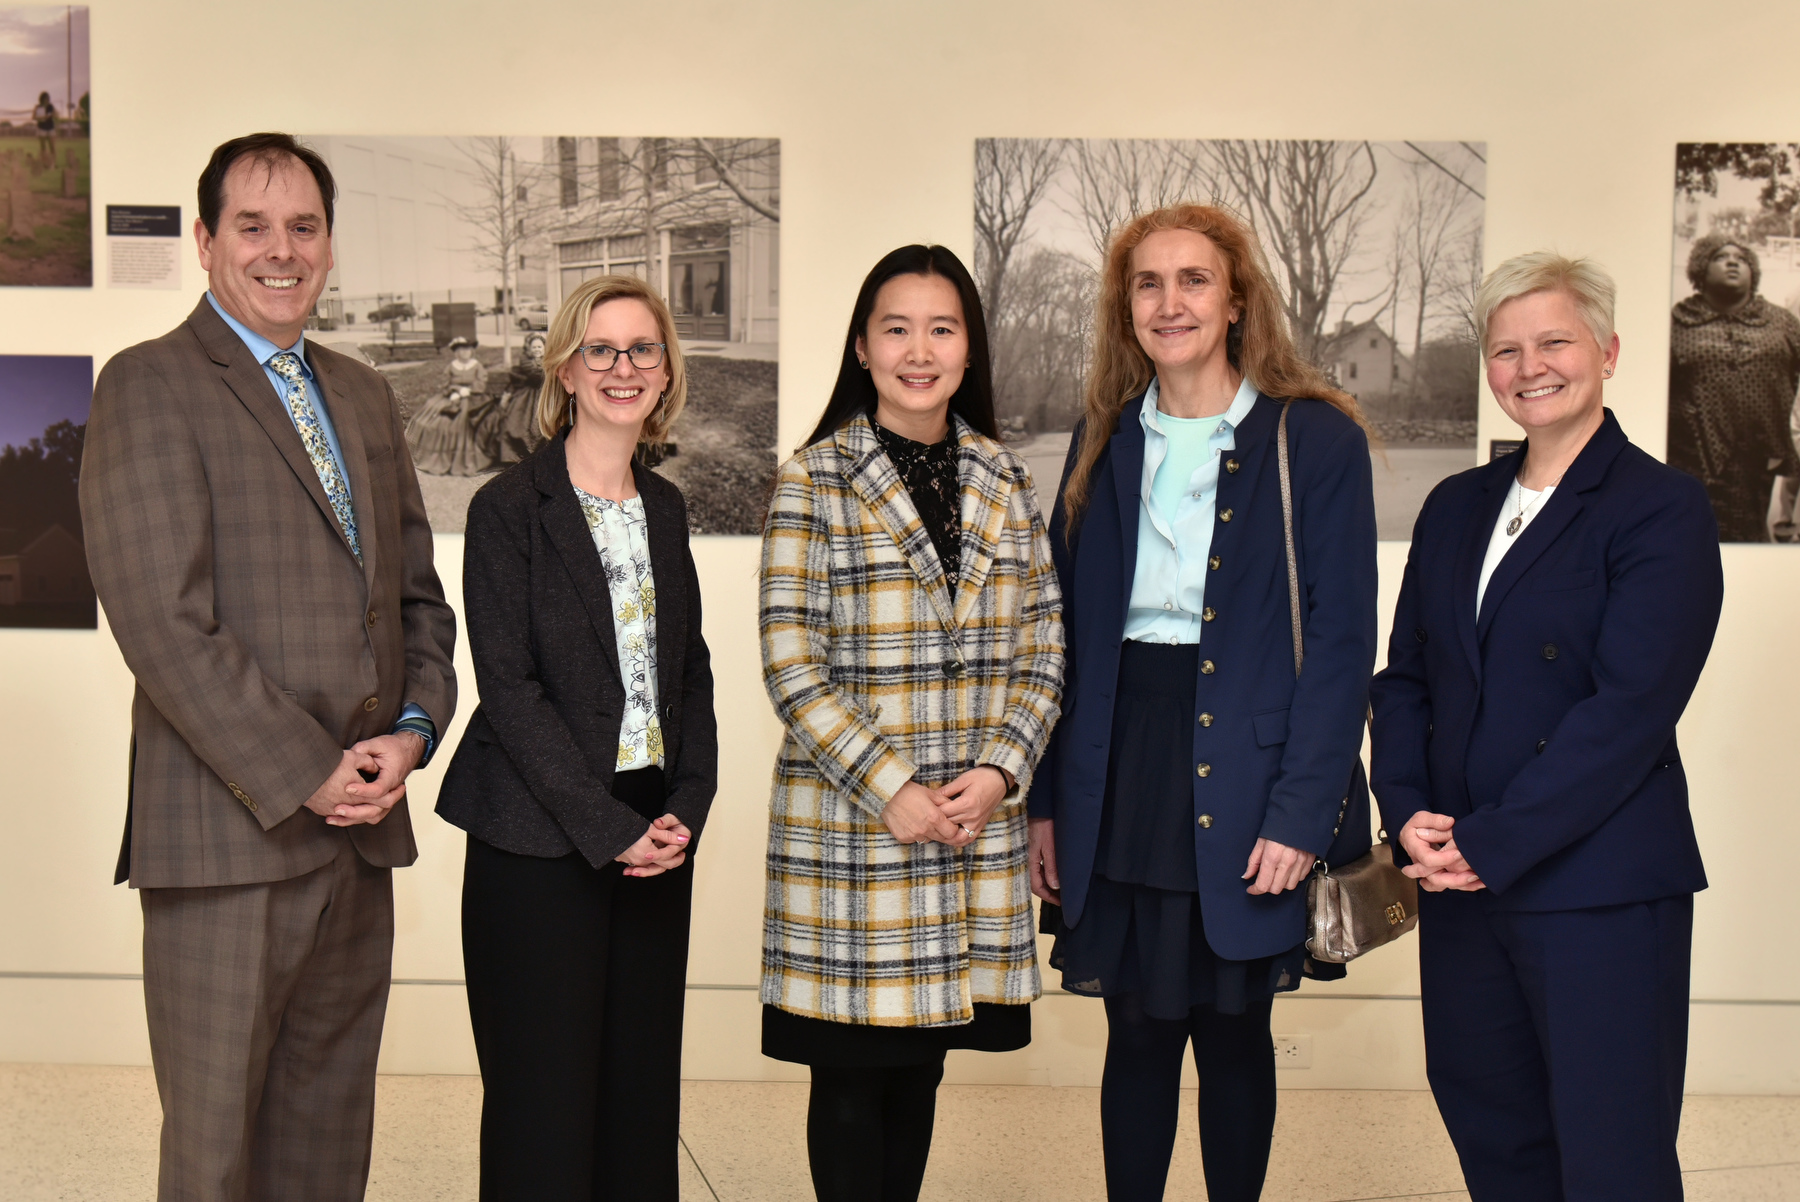 Several faculty members were recently promoted to the rank of full professor. Marking the occasion during a Feb. 16 ceremony in Tyler Hall, Provost Scott Furlong (left) and SUNY Oswego Officer in Charge Mary C. Toale (right) gather with promoted faculty, from left: Rebecca Mushtare, art and design as well as associate dean of graduate studies; Jing Lei, anthropology; and Isabelle Bichindaritz, computer science.